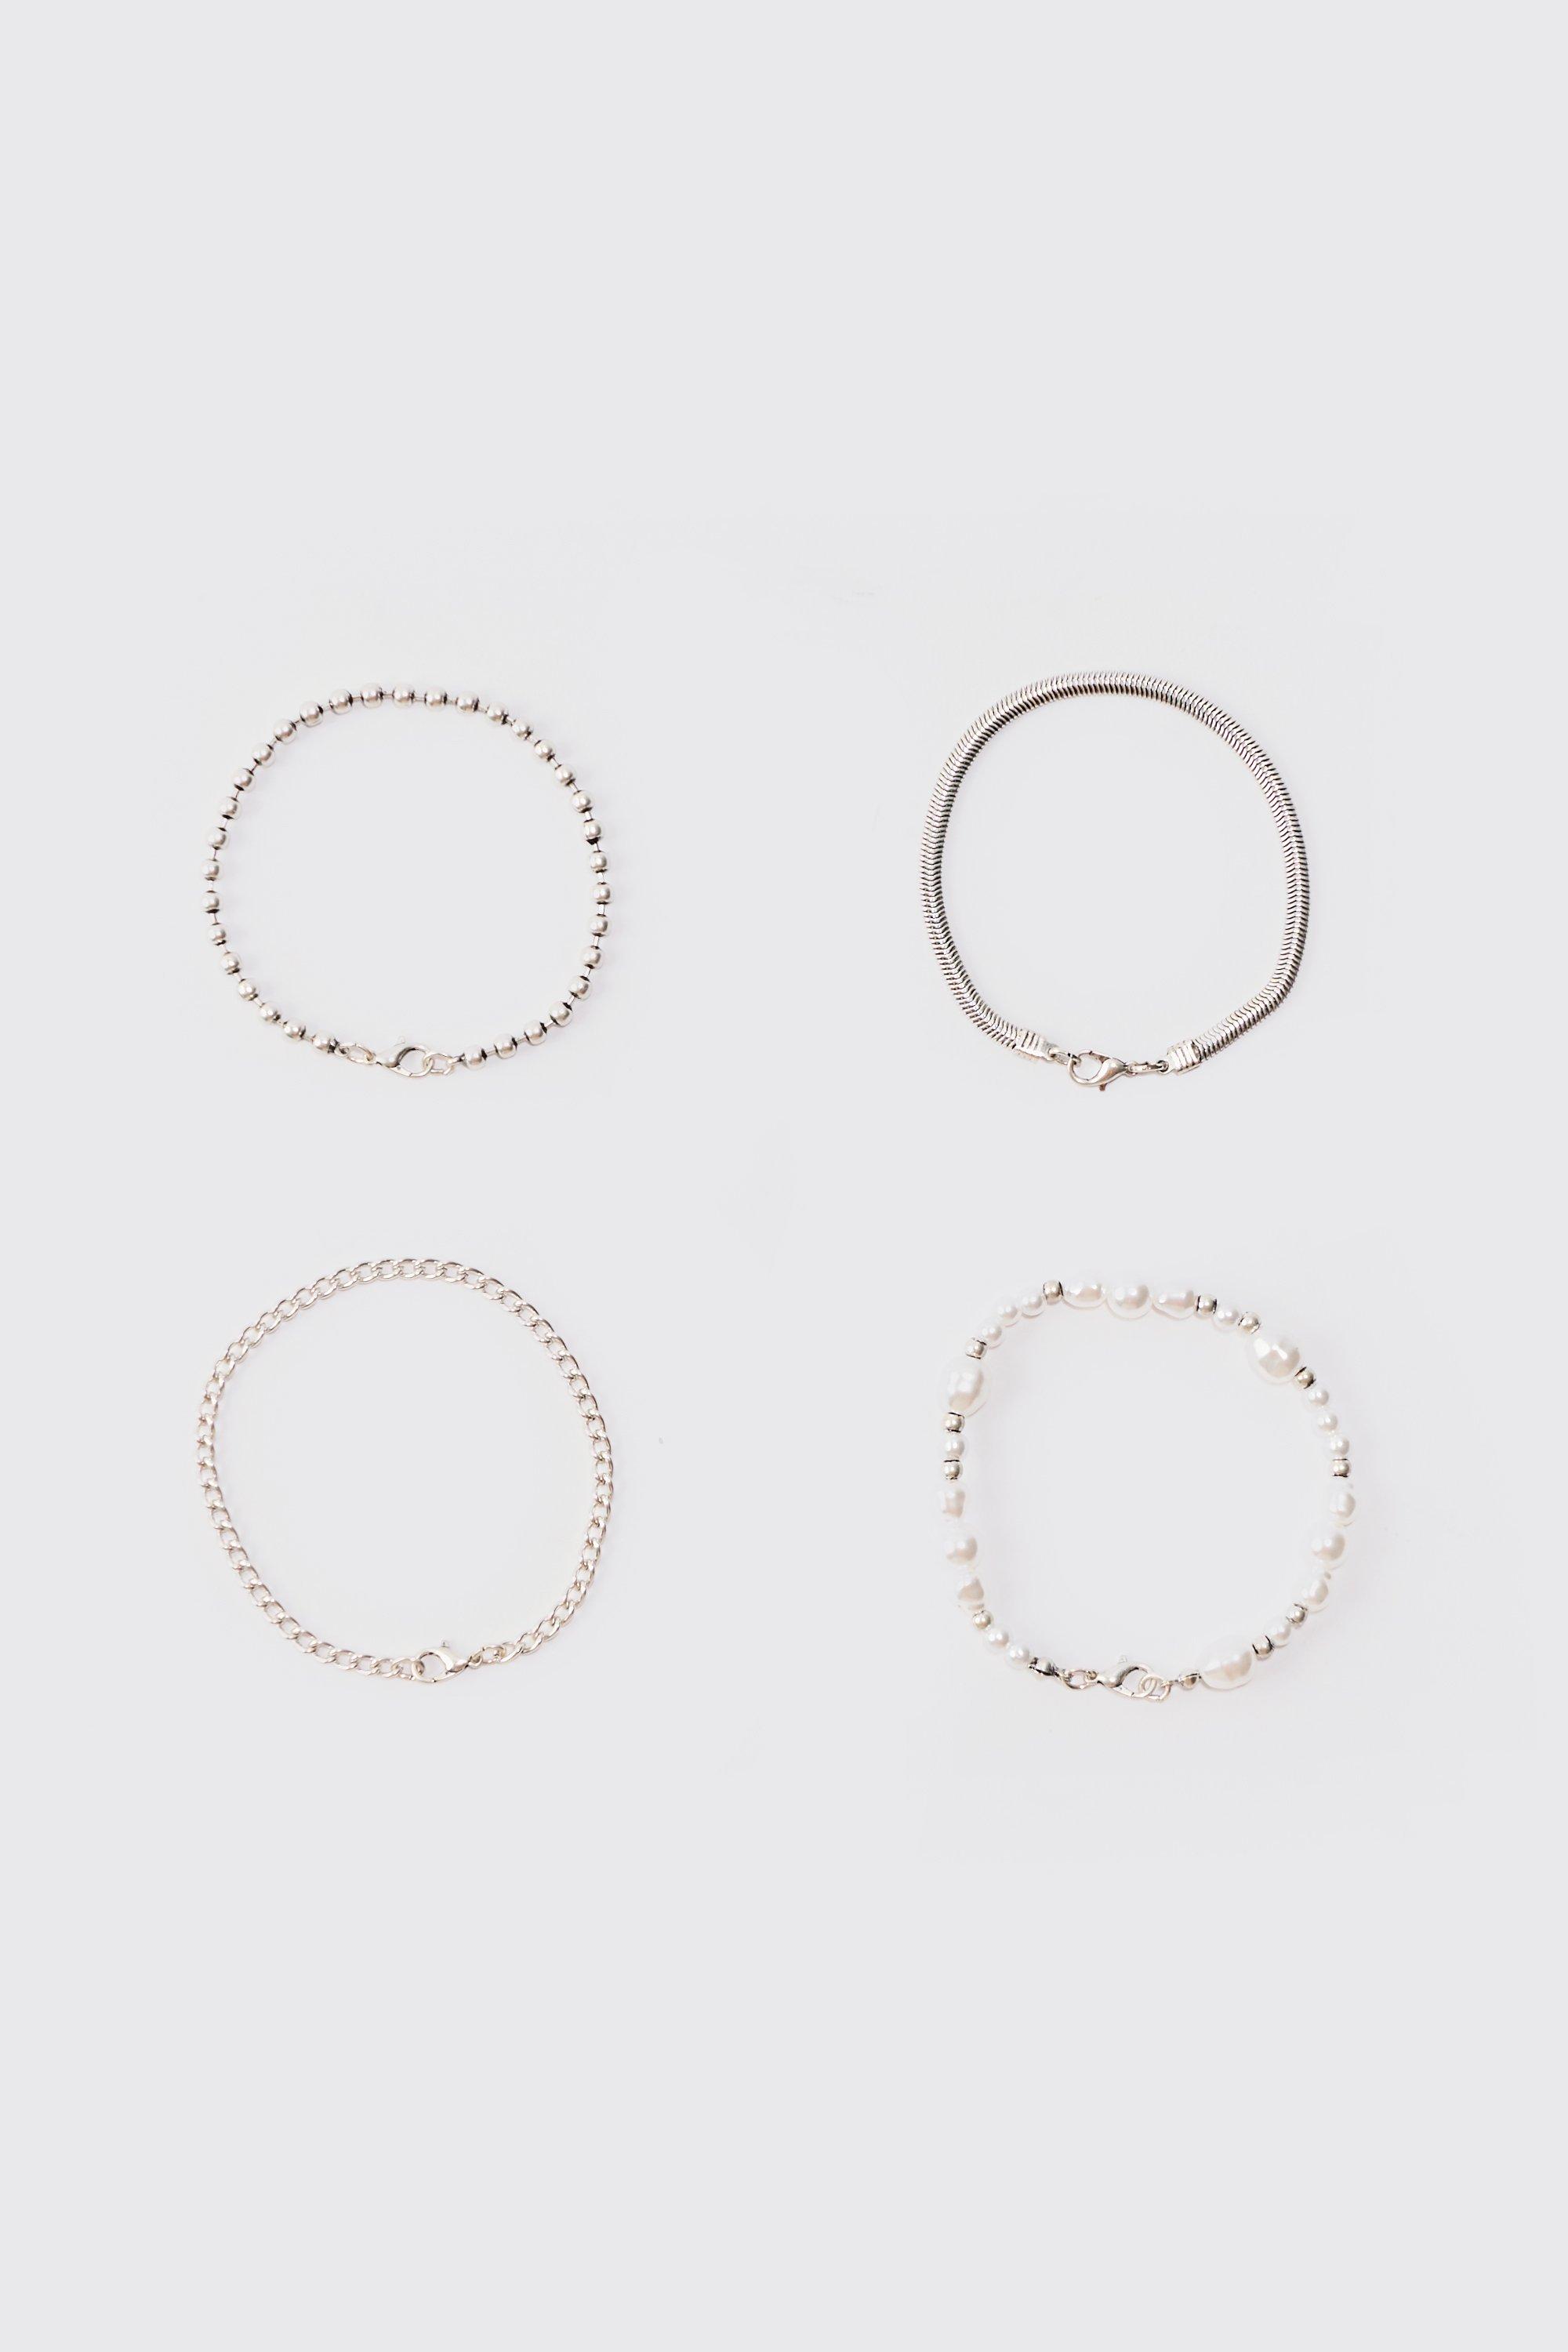 Image of 4 Pack Metal Chain Bracelets In Silver, Grigio